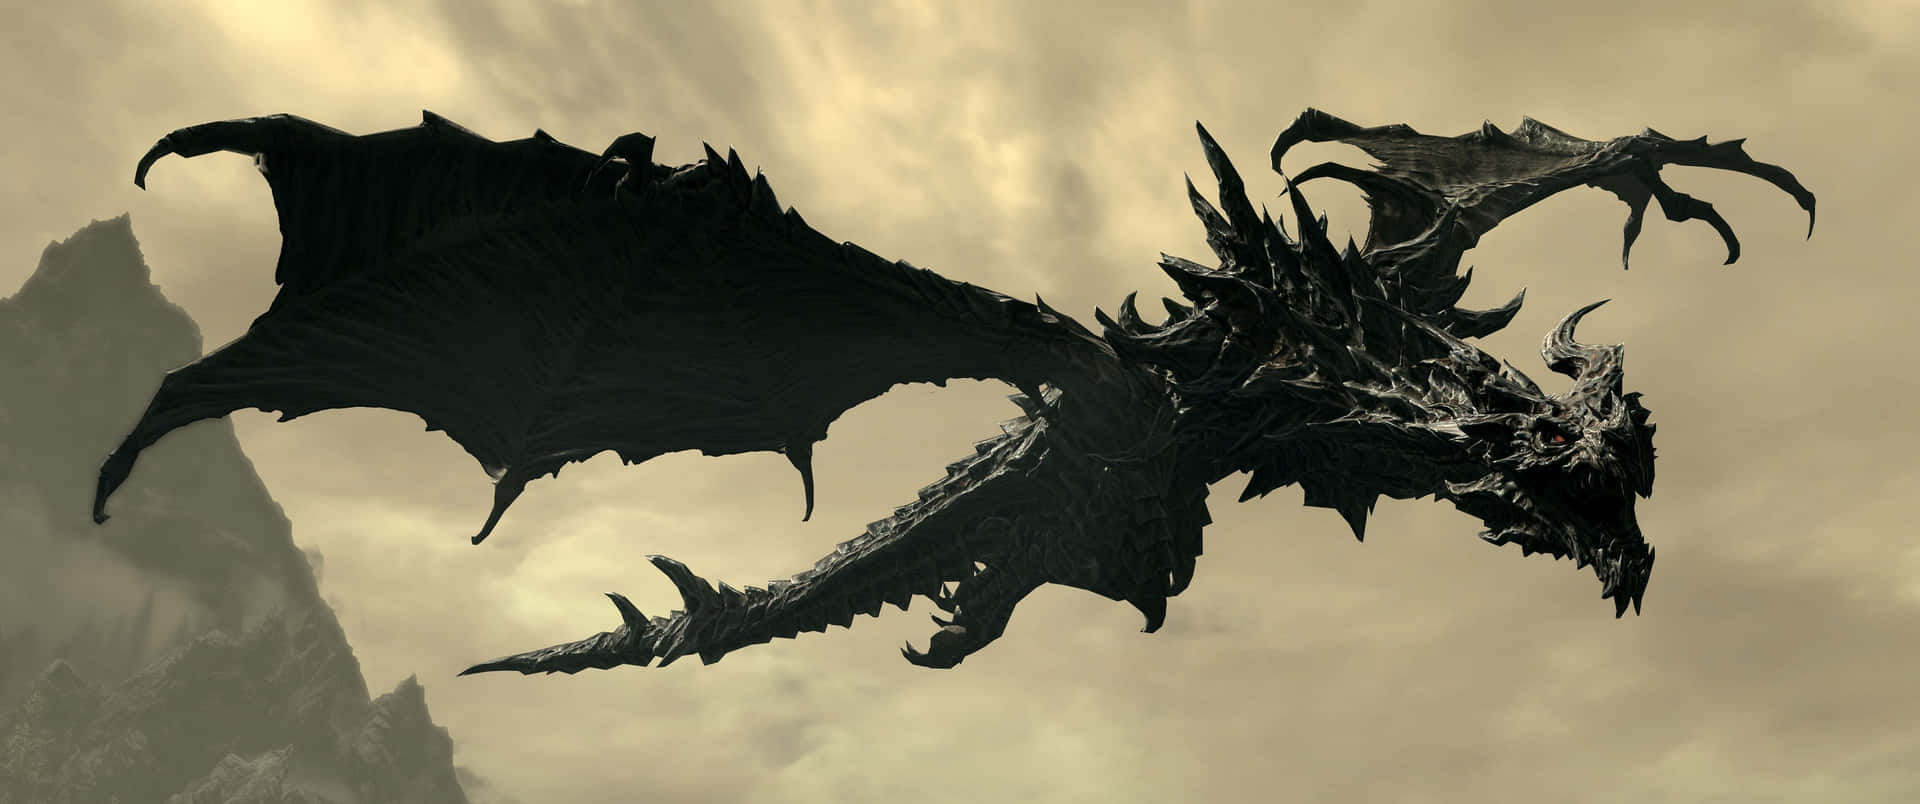 Explore the world of Skyrim in high resolution with this 3440x1440p image